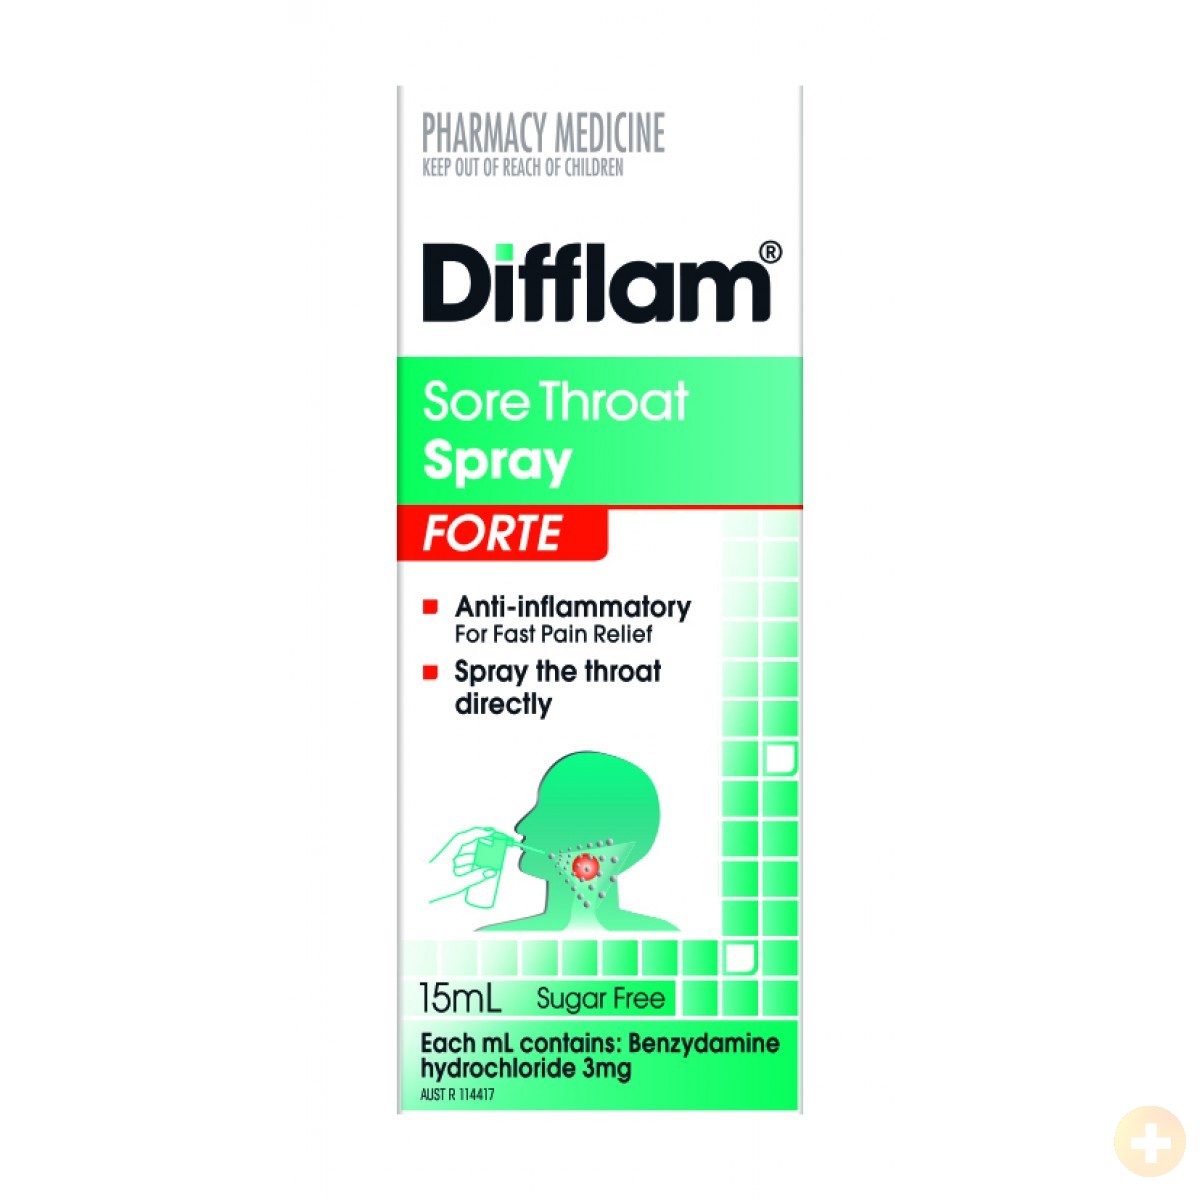 Difflam forte